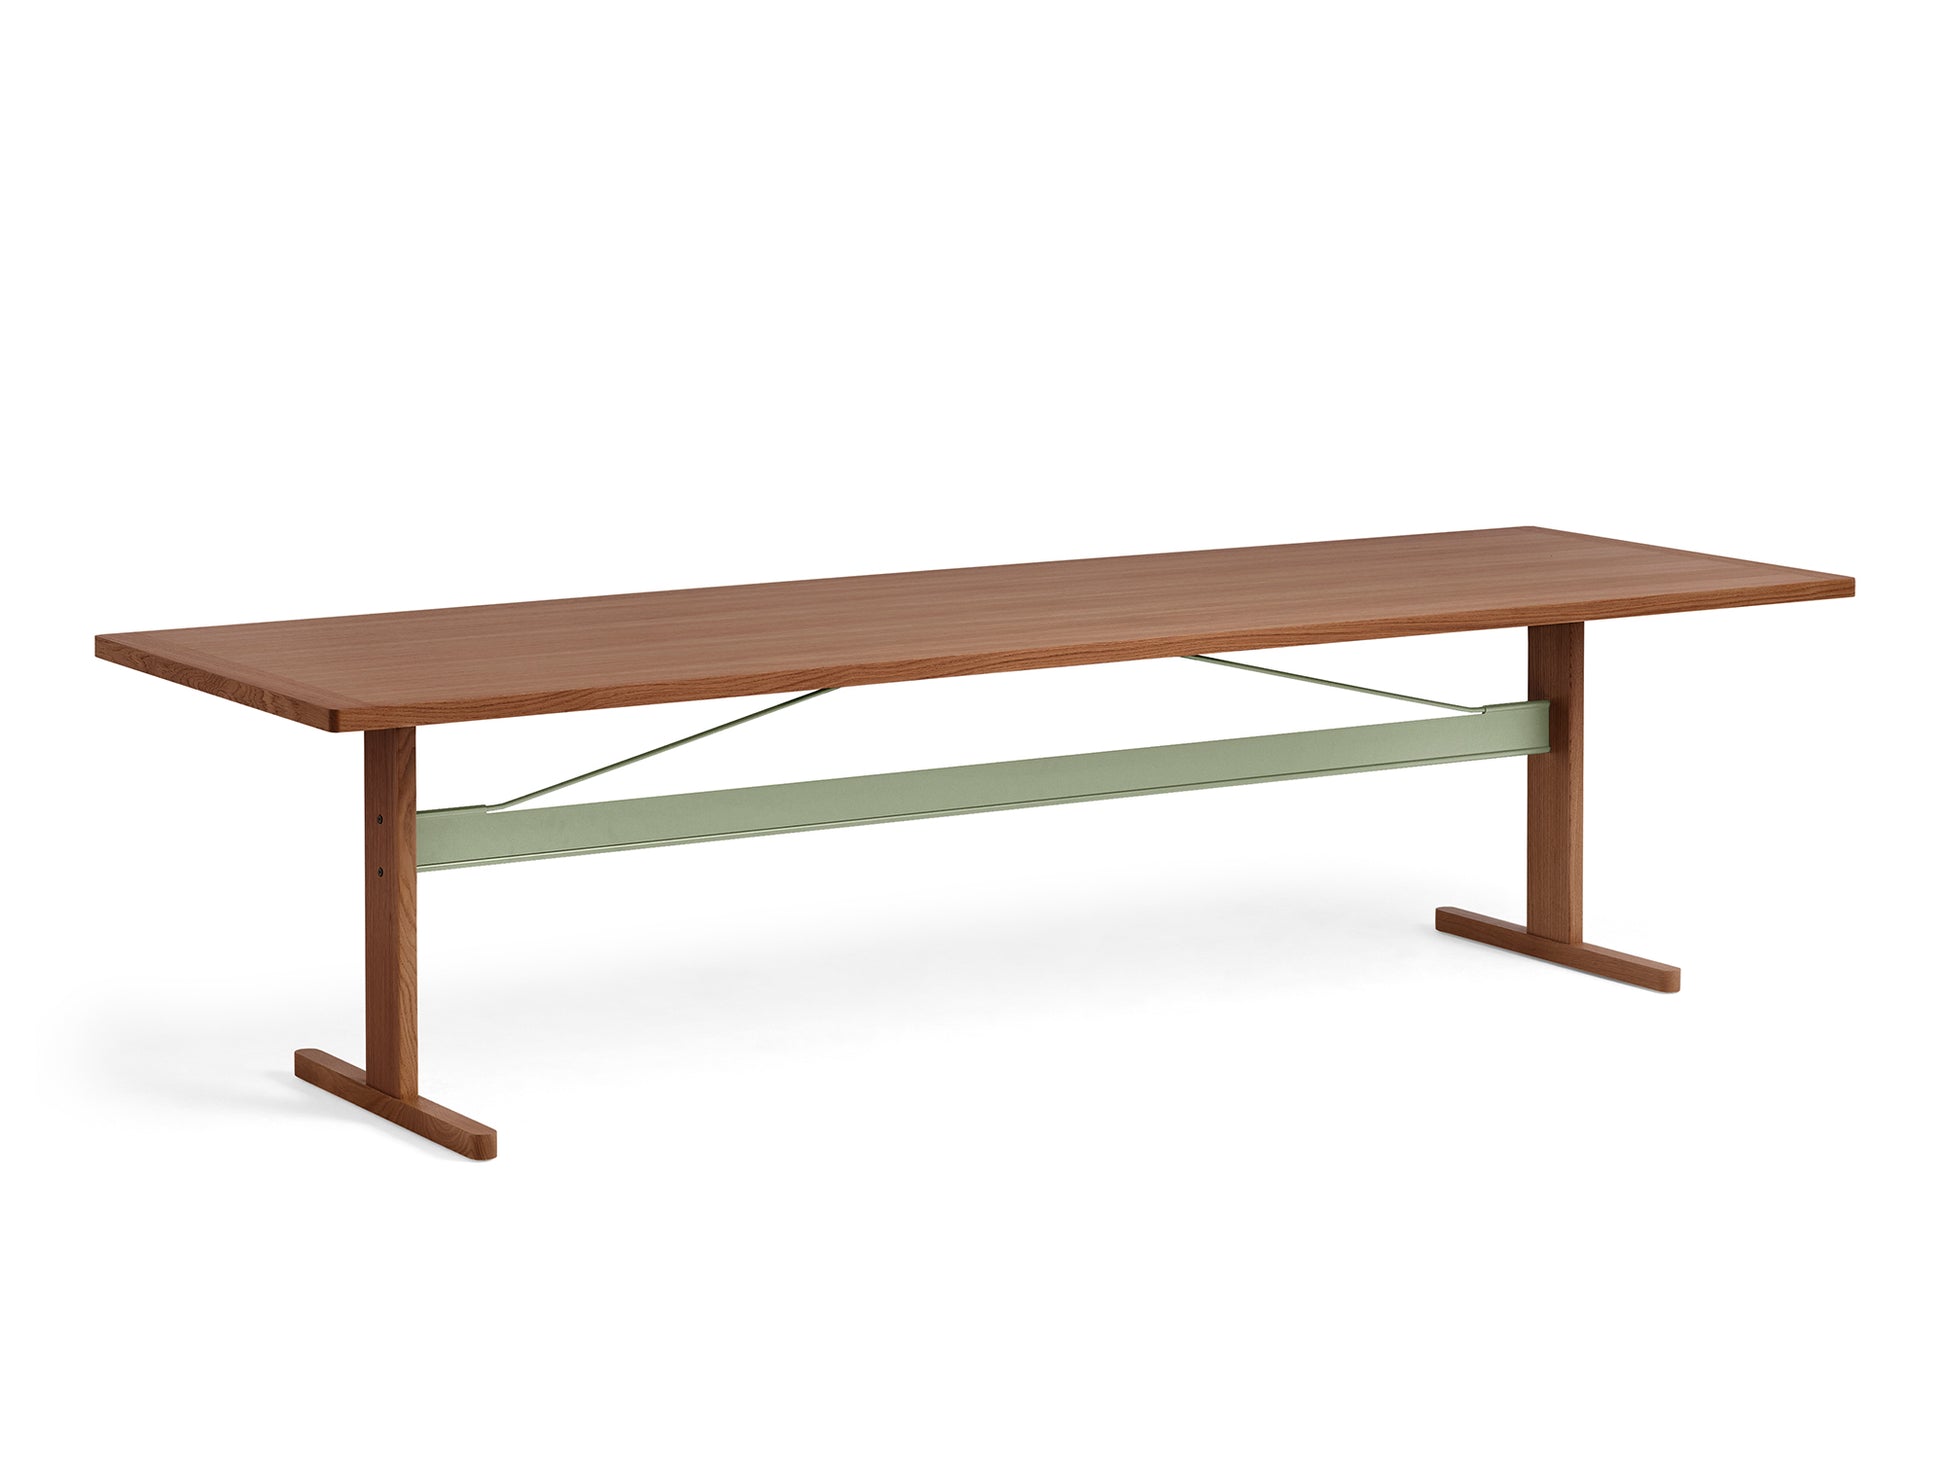 Passerelle Table (Veneer Tabletop) by HAY - Length: 300 cm / Walnut Tabletop with Thyme Green Crossbar